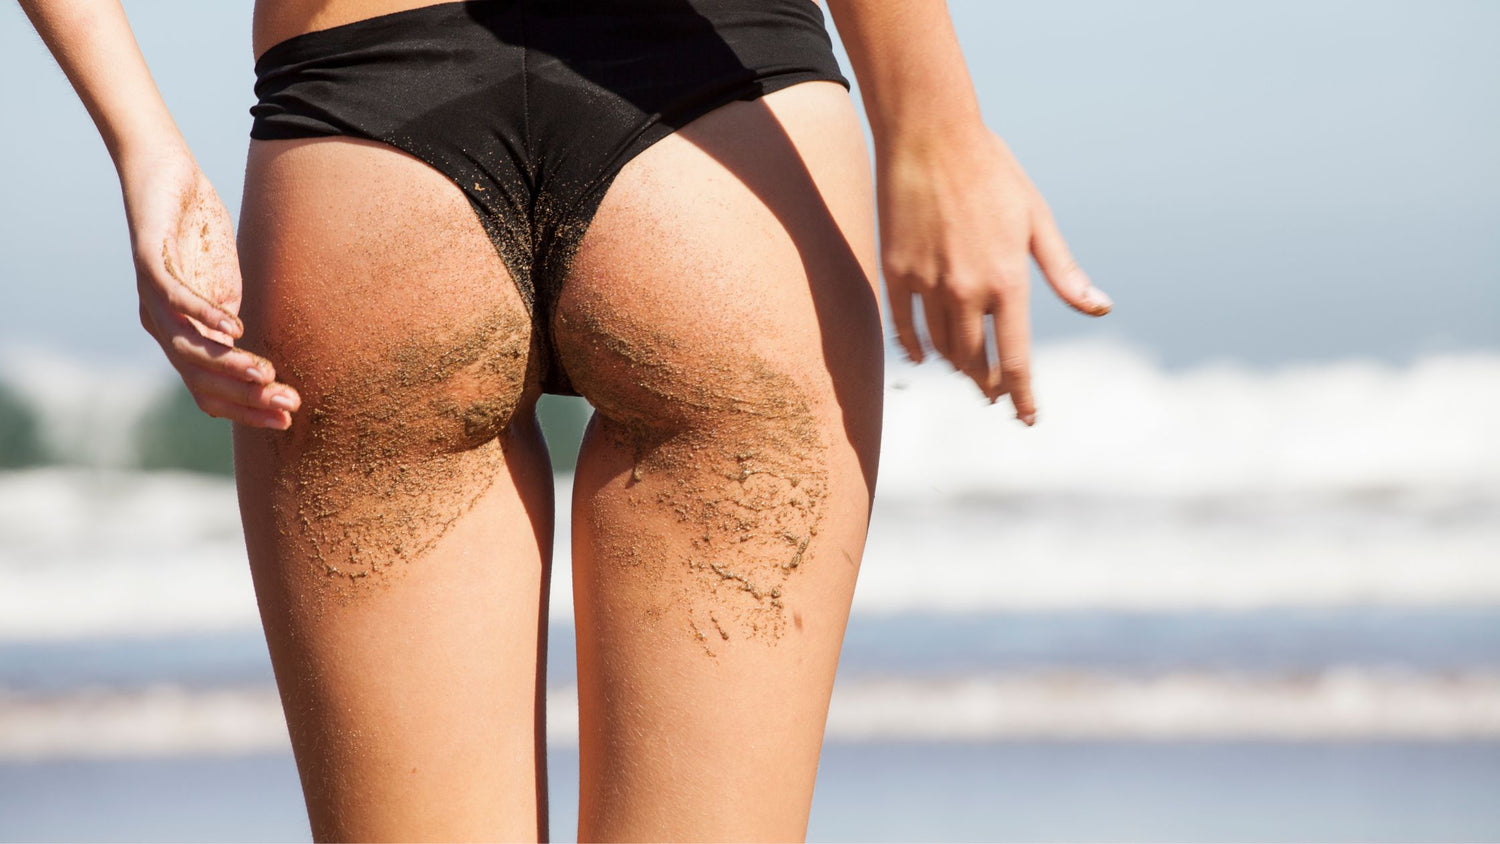 How to Reduce and Hide Cellulite Easily